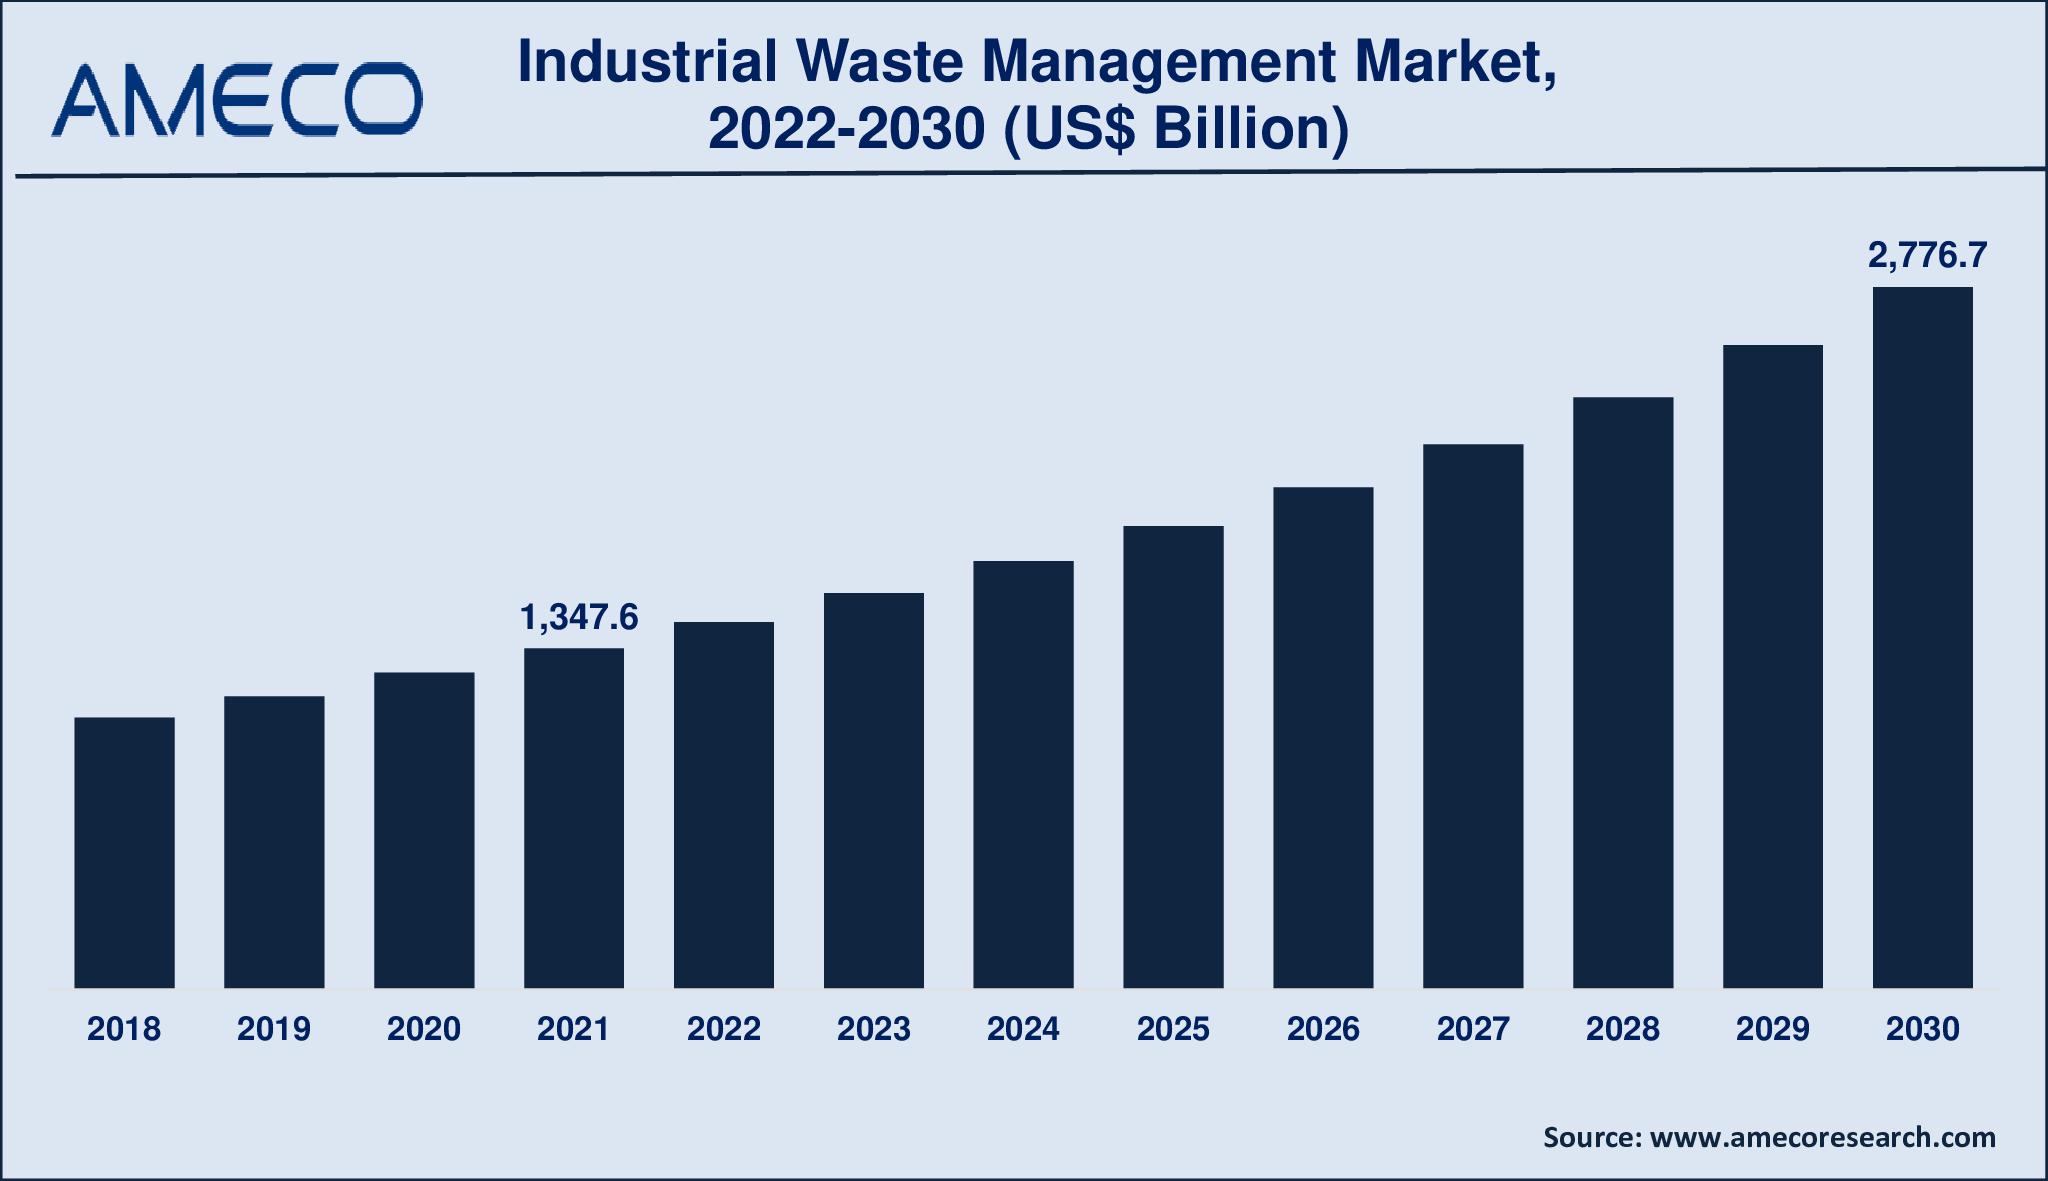 Industrial Waste Management Market Size, Share, Growth, Trends, and Forecast 2022-2030